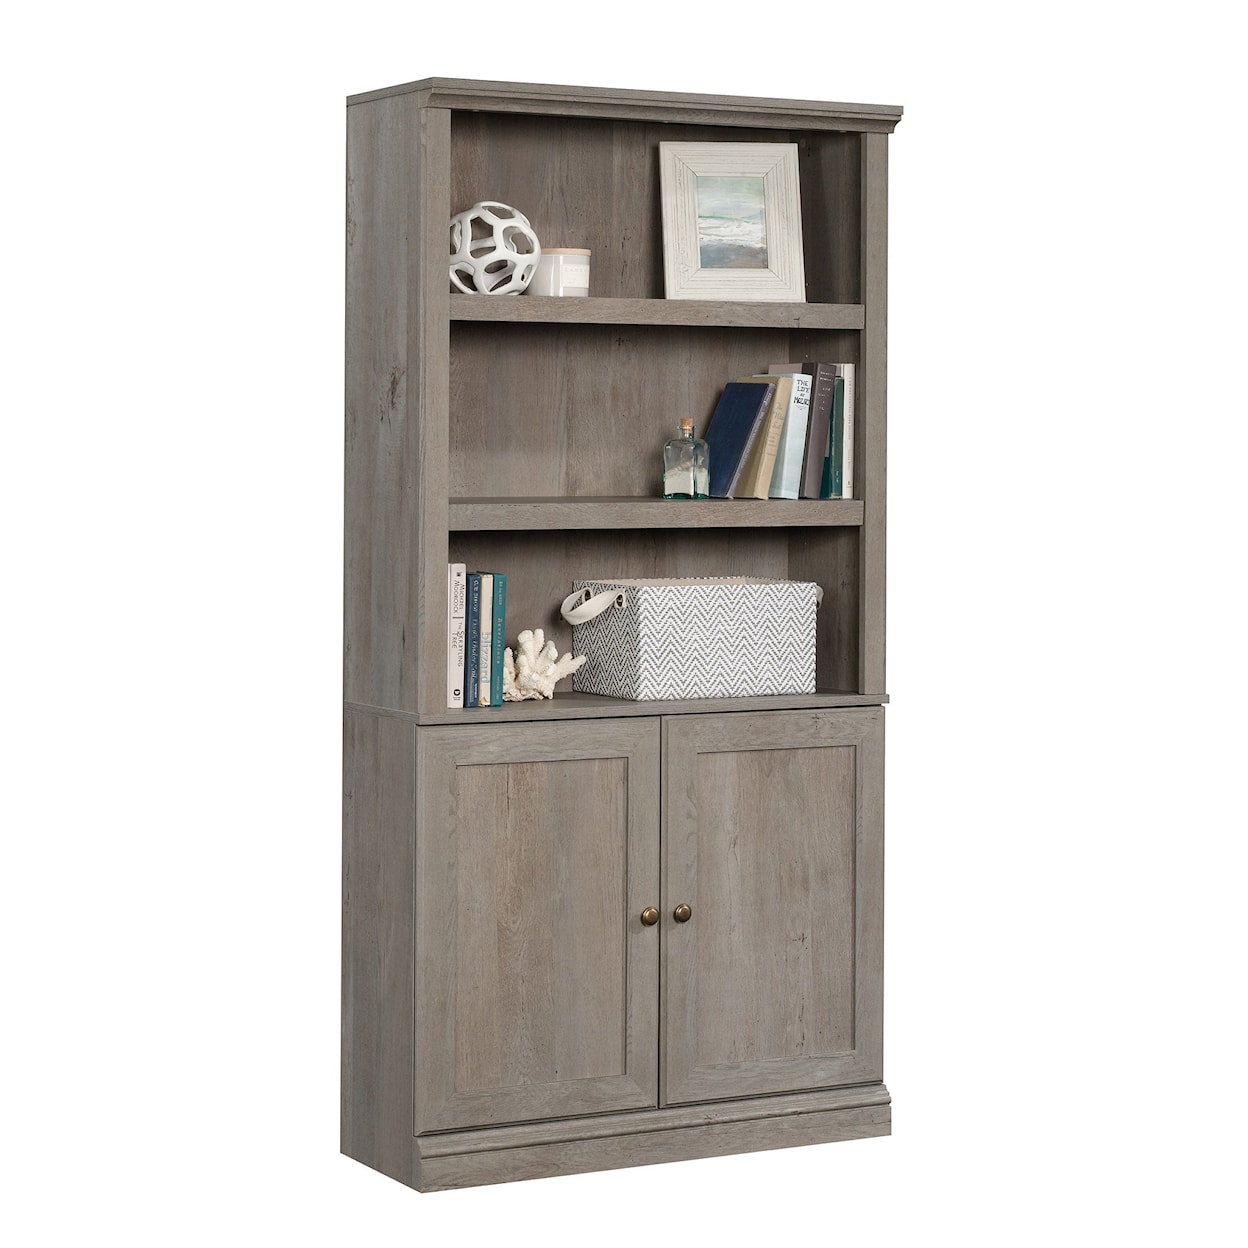 Sauder Miscellaneous Storage Bookcase with Doors